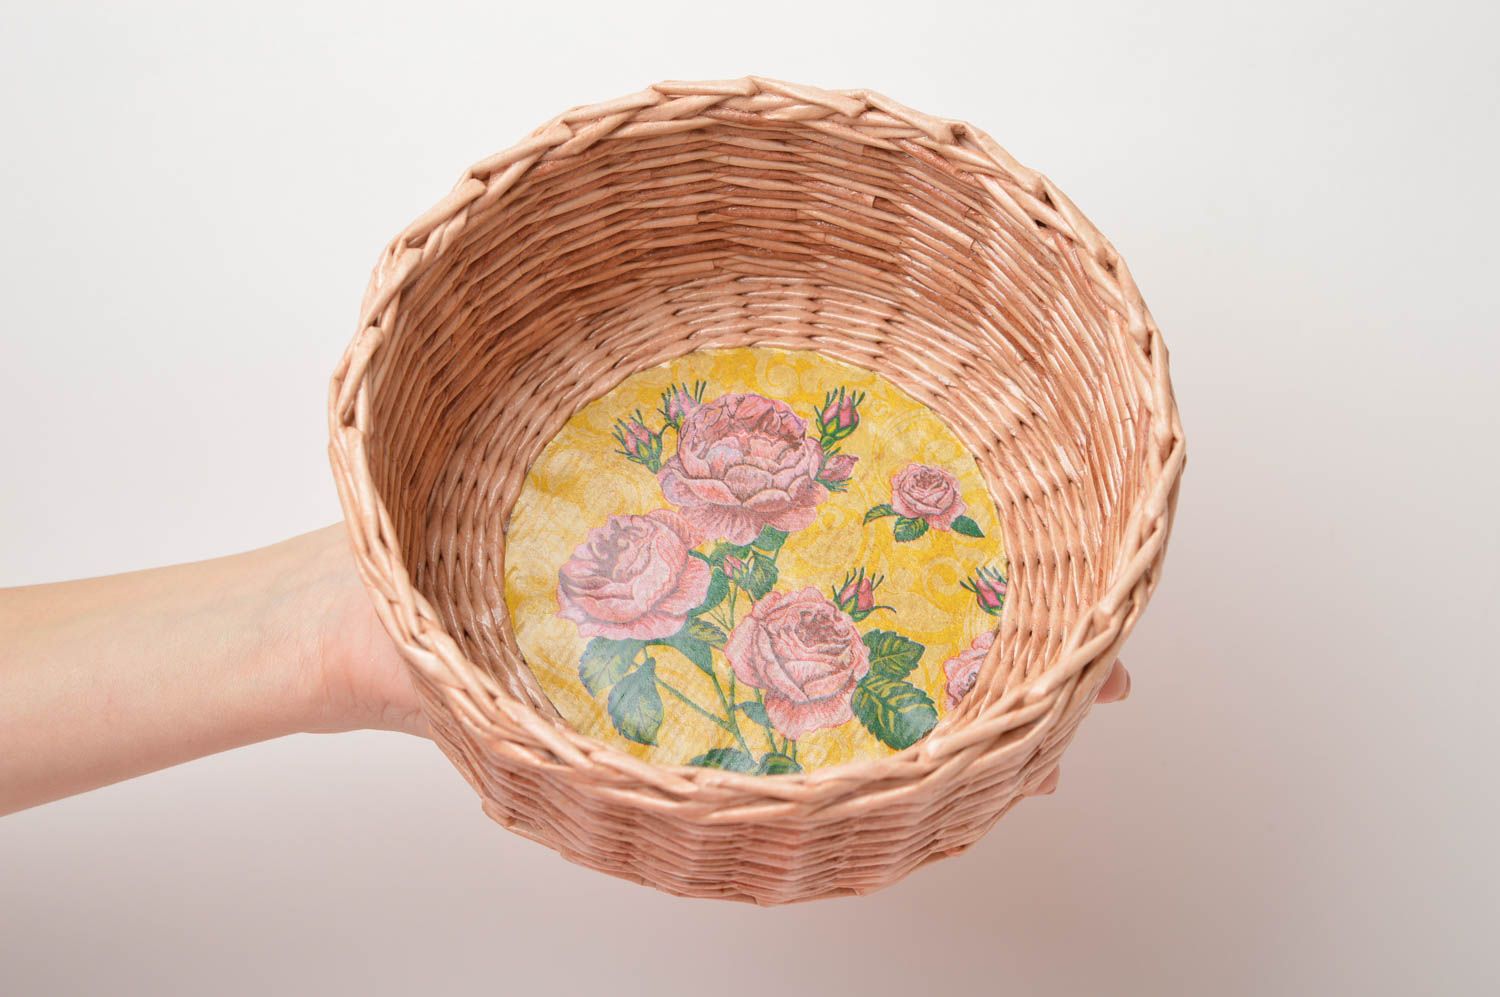 Paper basket homemade home decor storage basket small wicker basket cool gifts photo 2